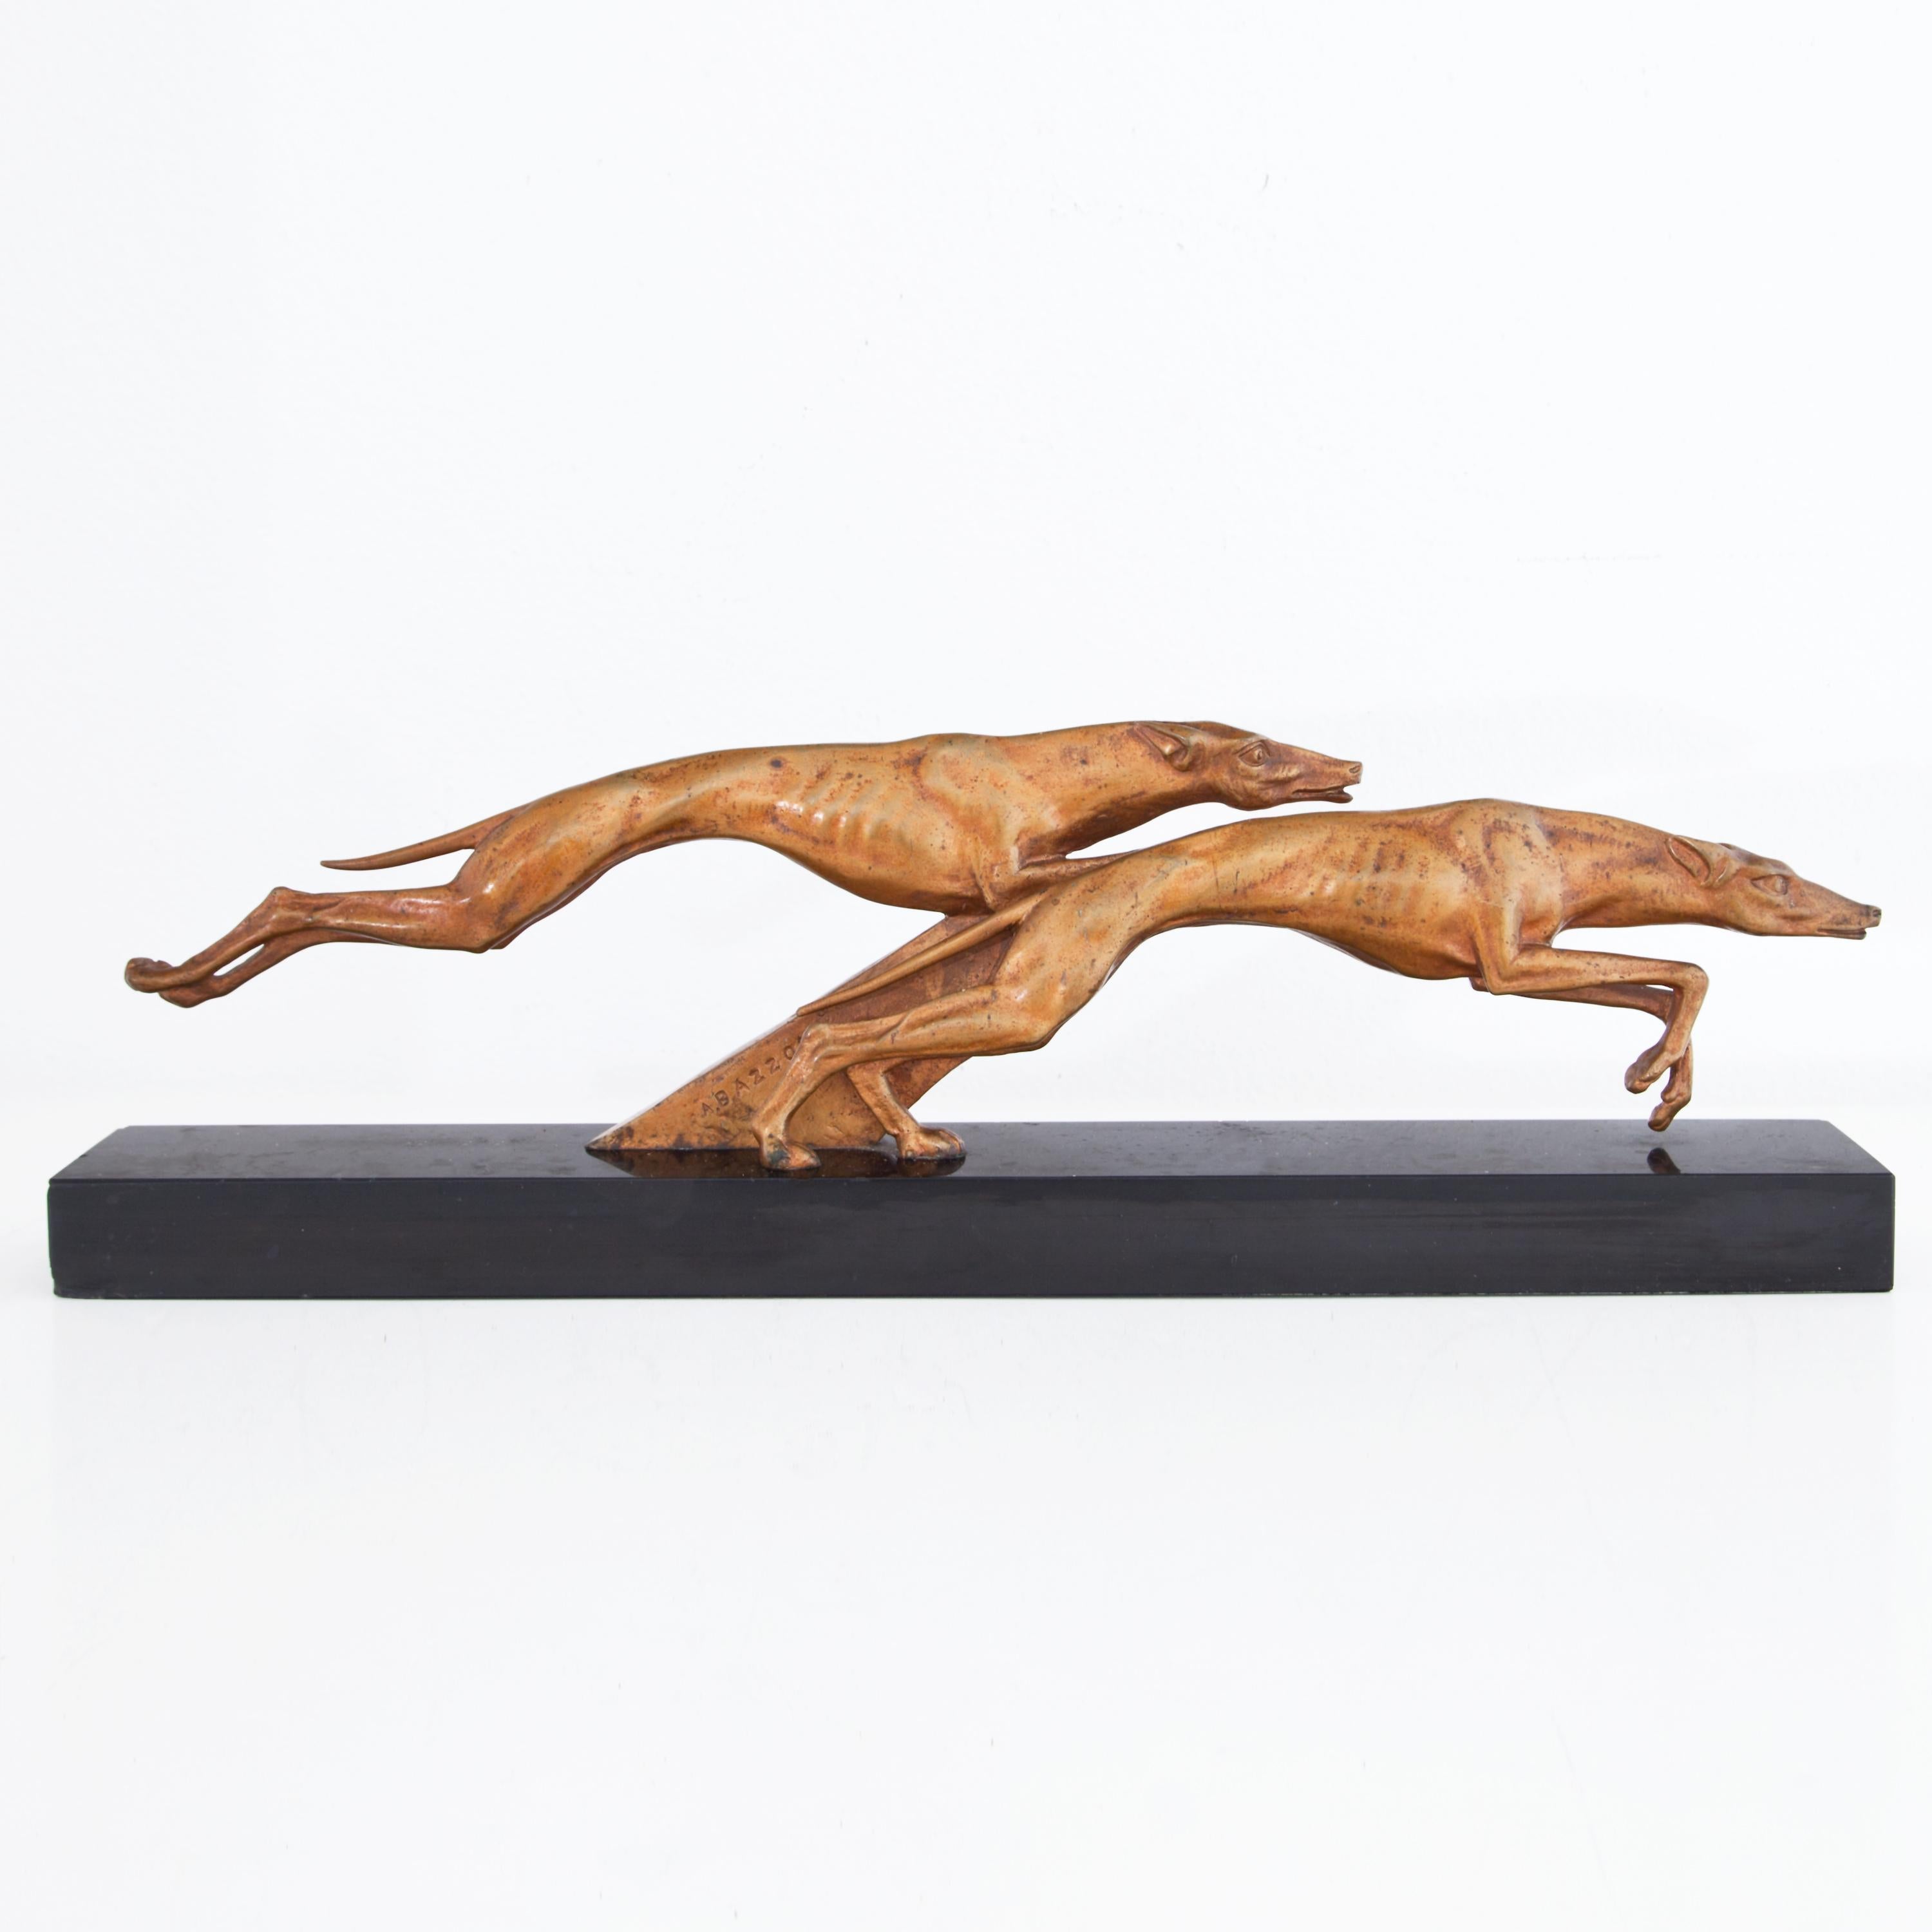 Bronze of two naturalistically modelled racing greyhounds on a black base. Signed A. Bazzoni.